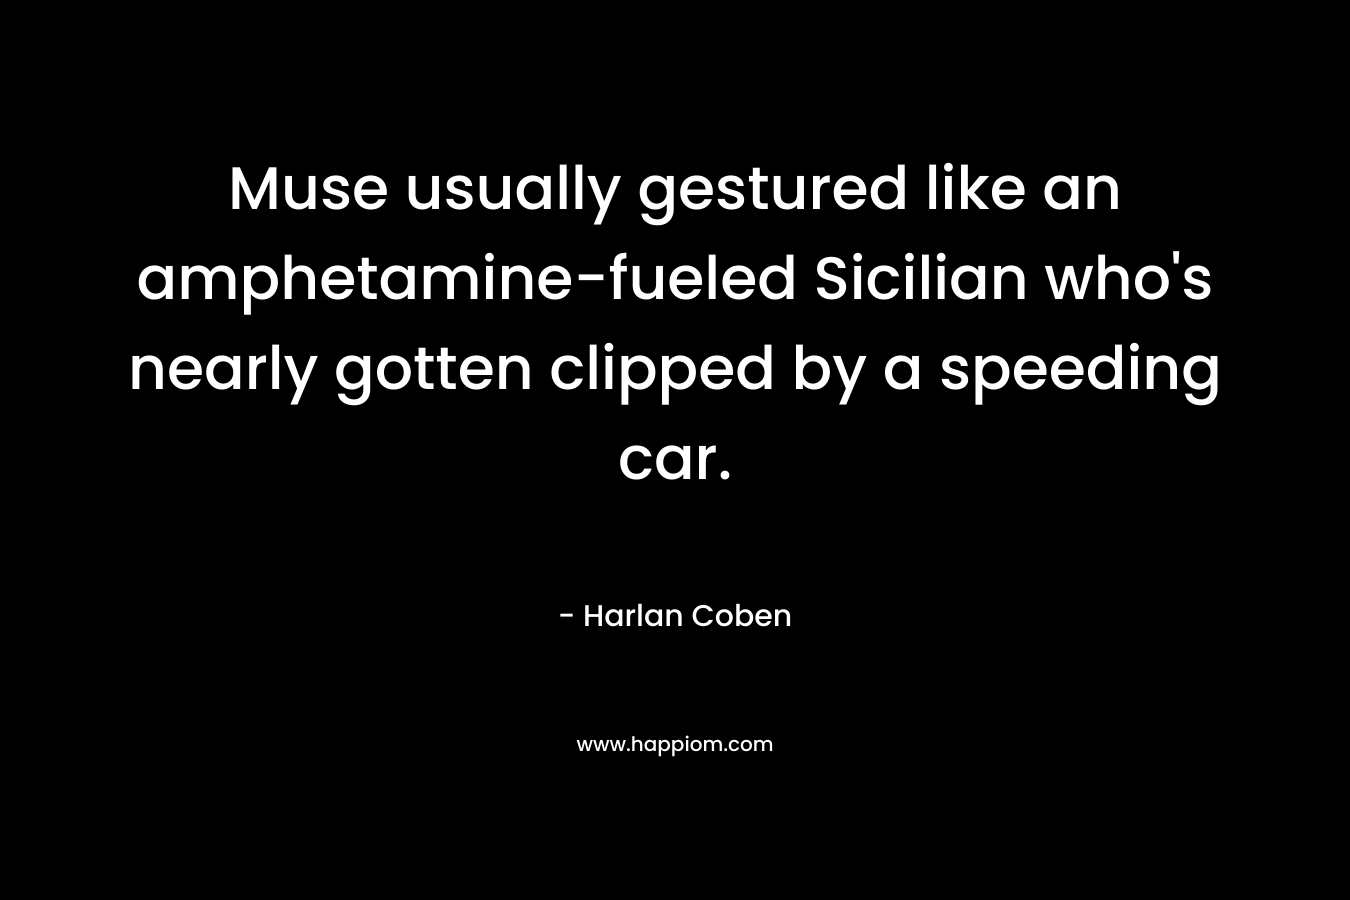 Muse usually gestured like an amphetamine-fueled Sicilian who’s nearly gotten clipped by a speeding car. – Harlan Coben